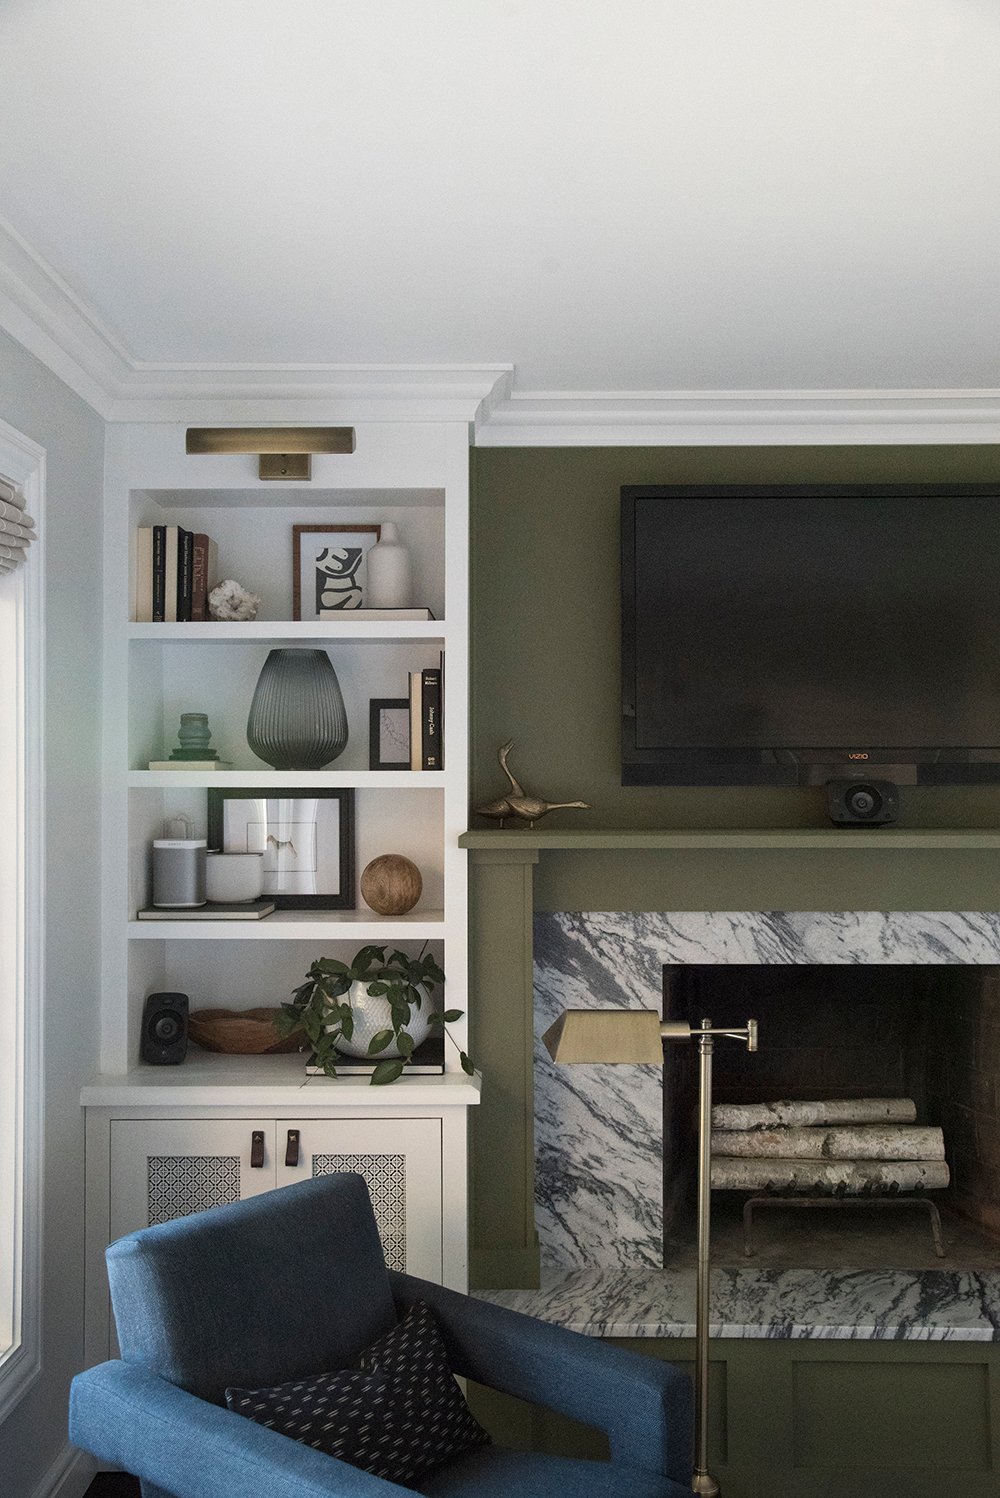 Design Discussion : TV Over the Fireplace - roomfortuesday.com